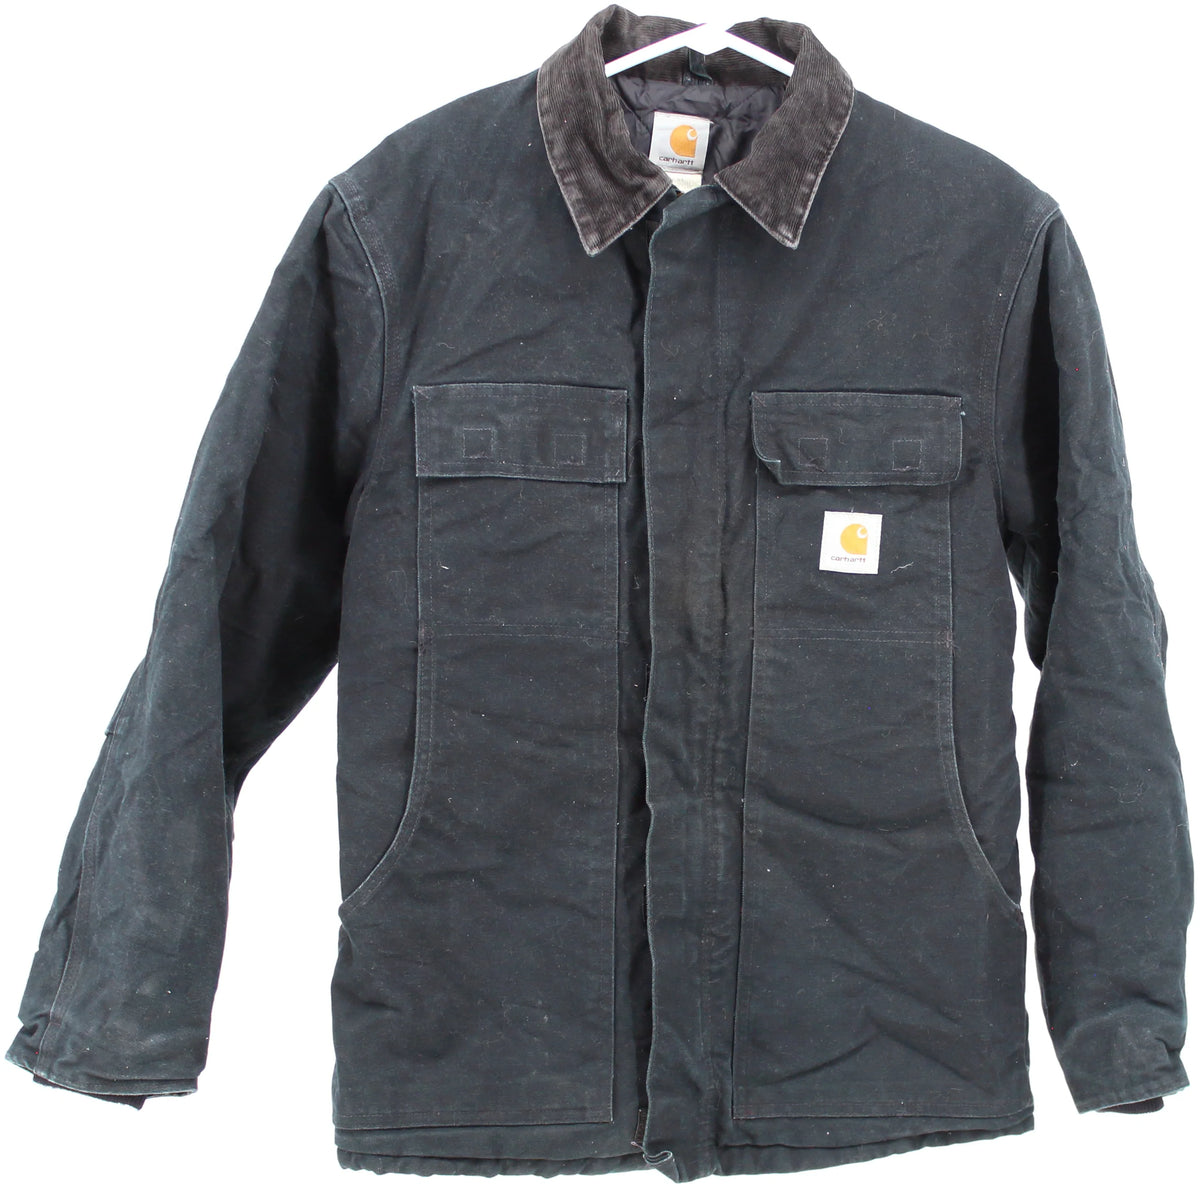 Carhartt Black Quilt Lined Jacket and Corduroy Collar